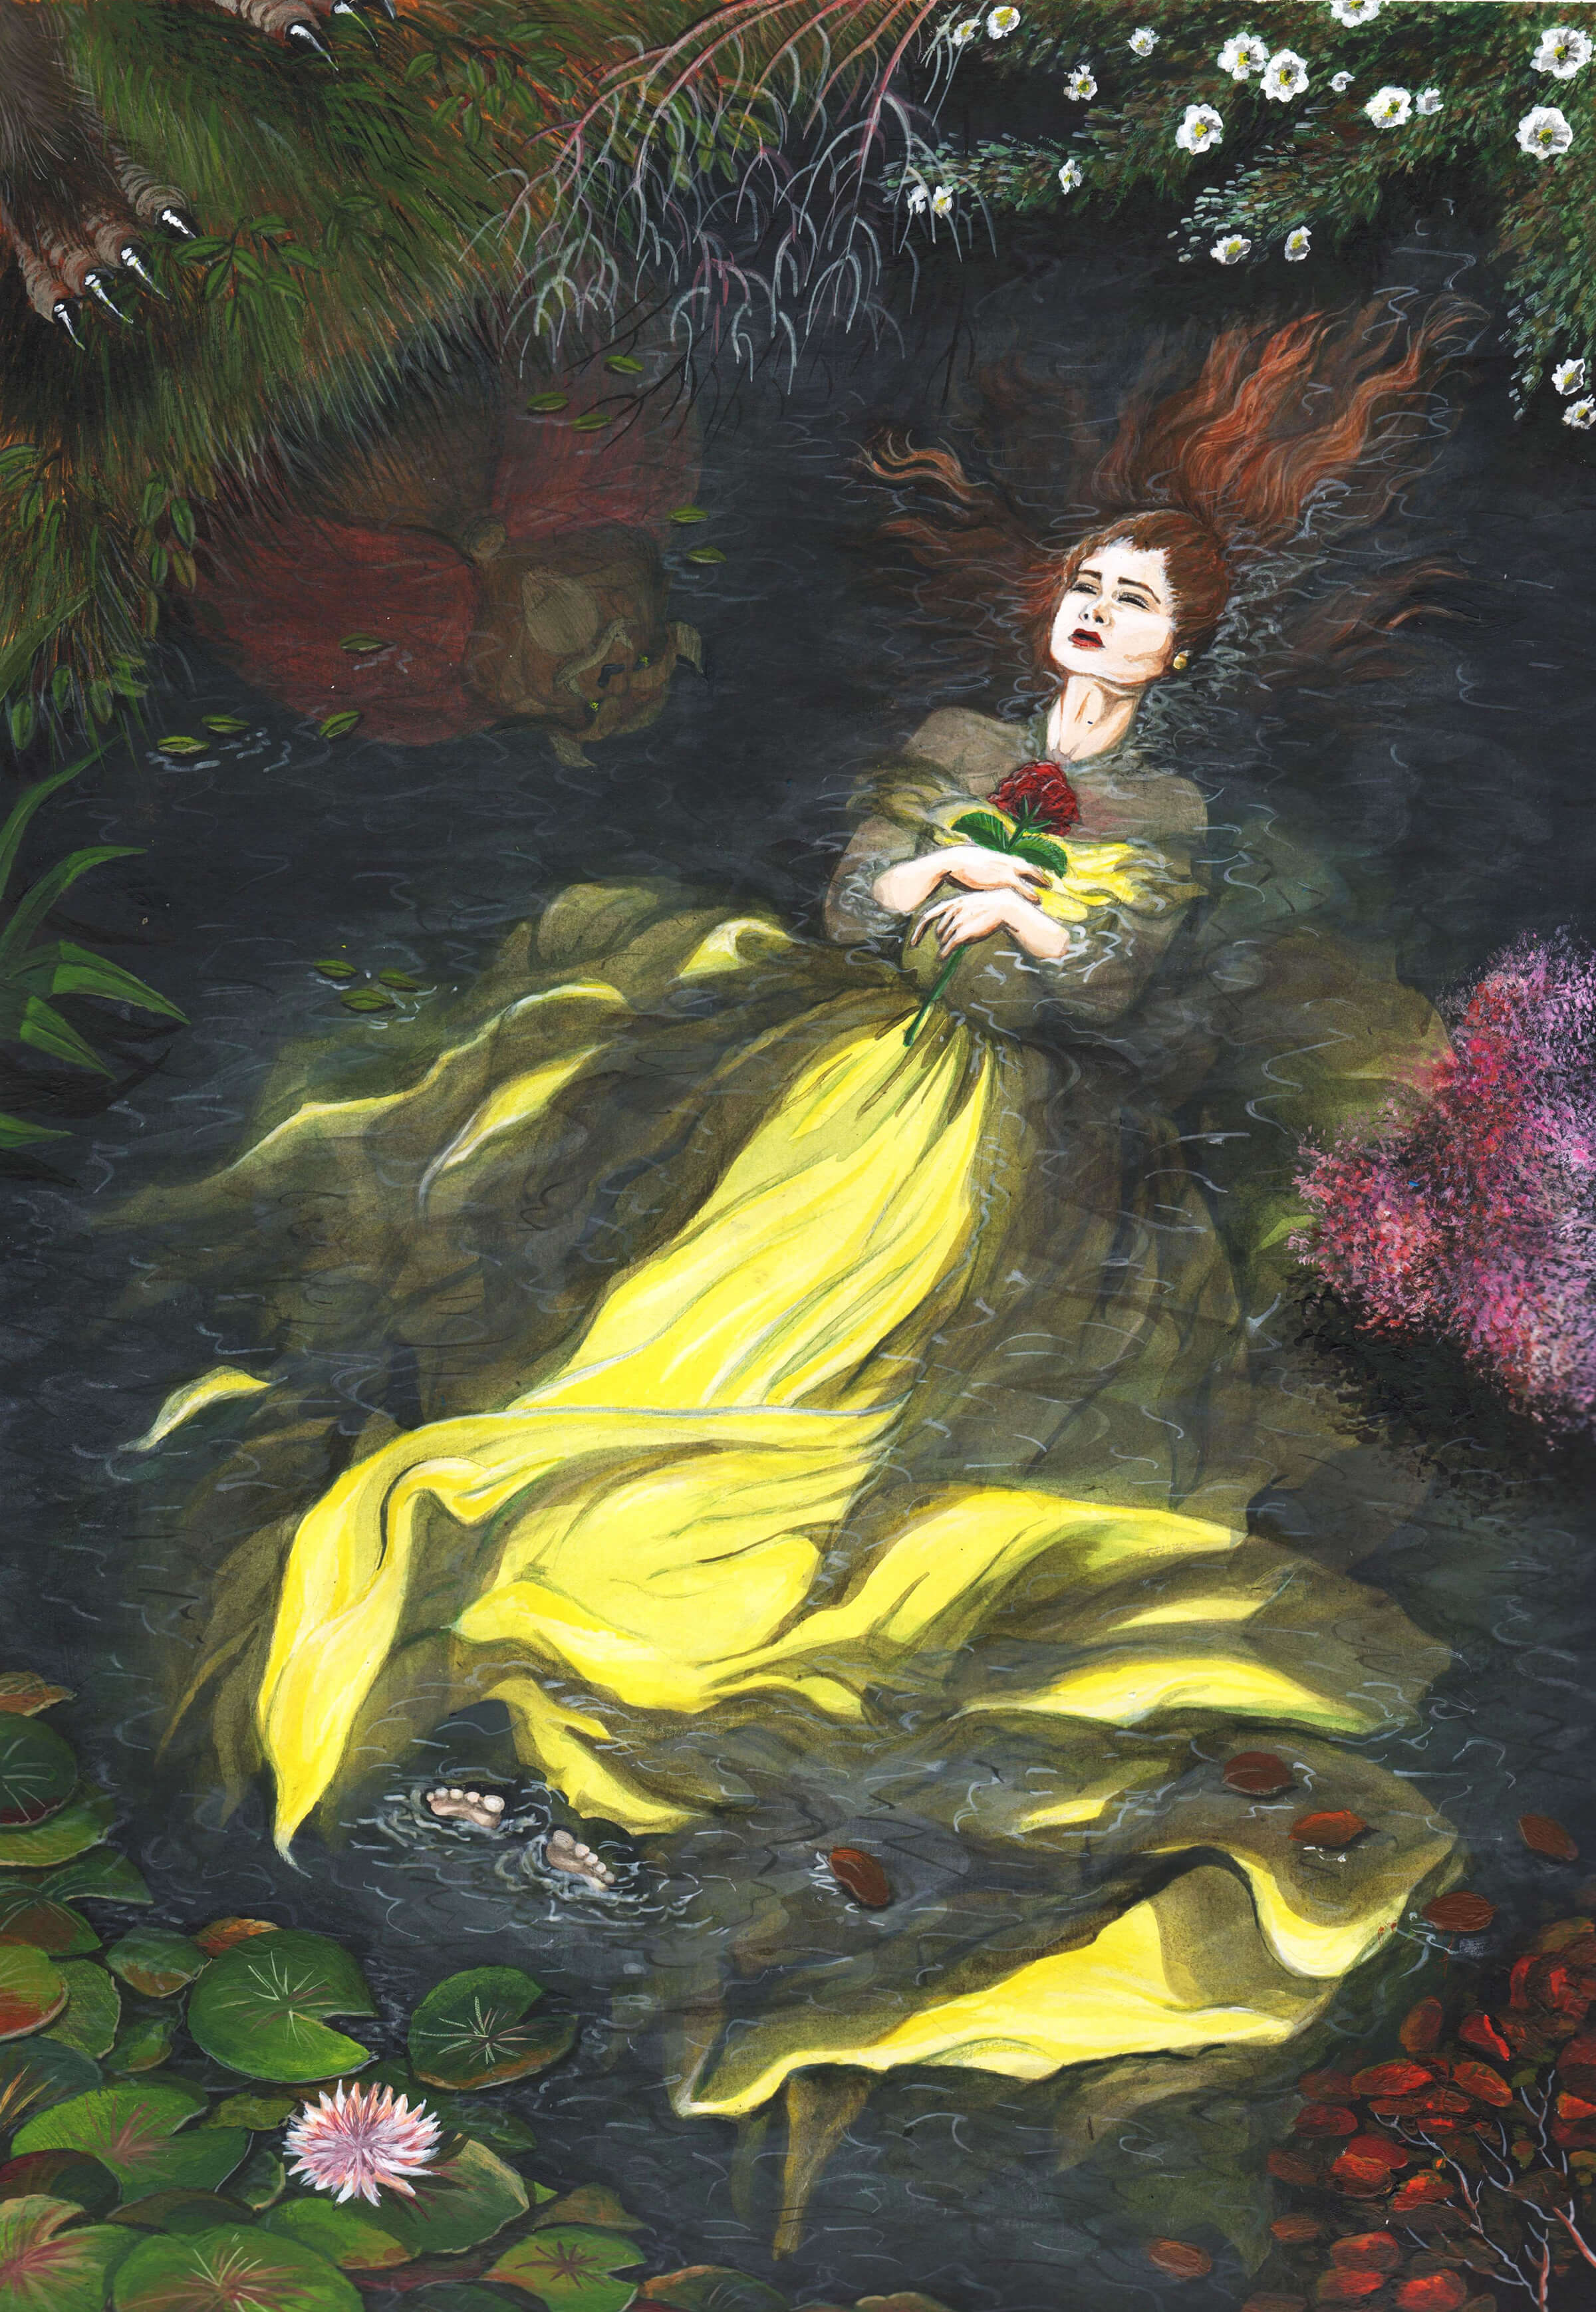 A woman in a flowing yellow dress clutches a single red flower at her chest floating unconscious in a forest pond.